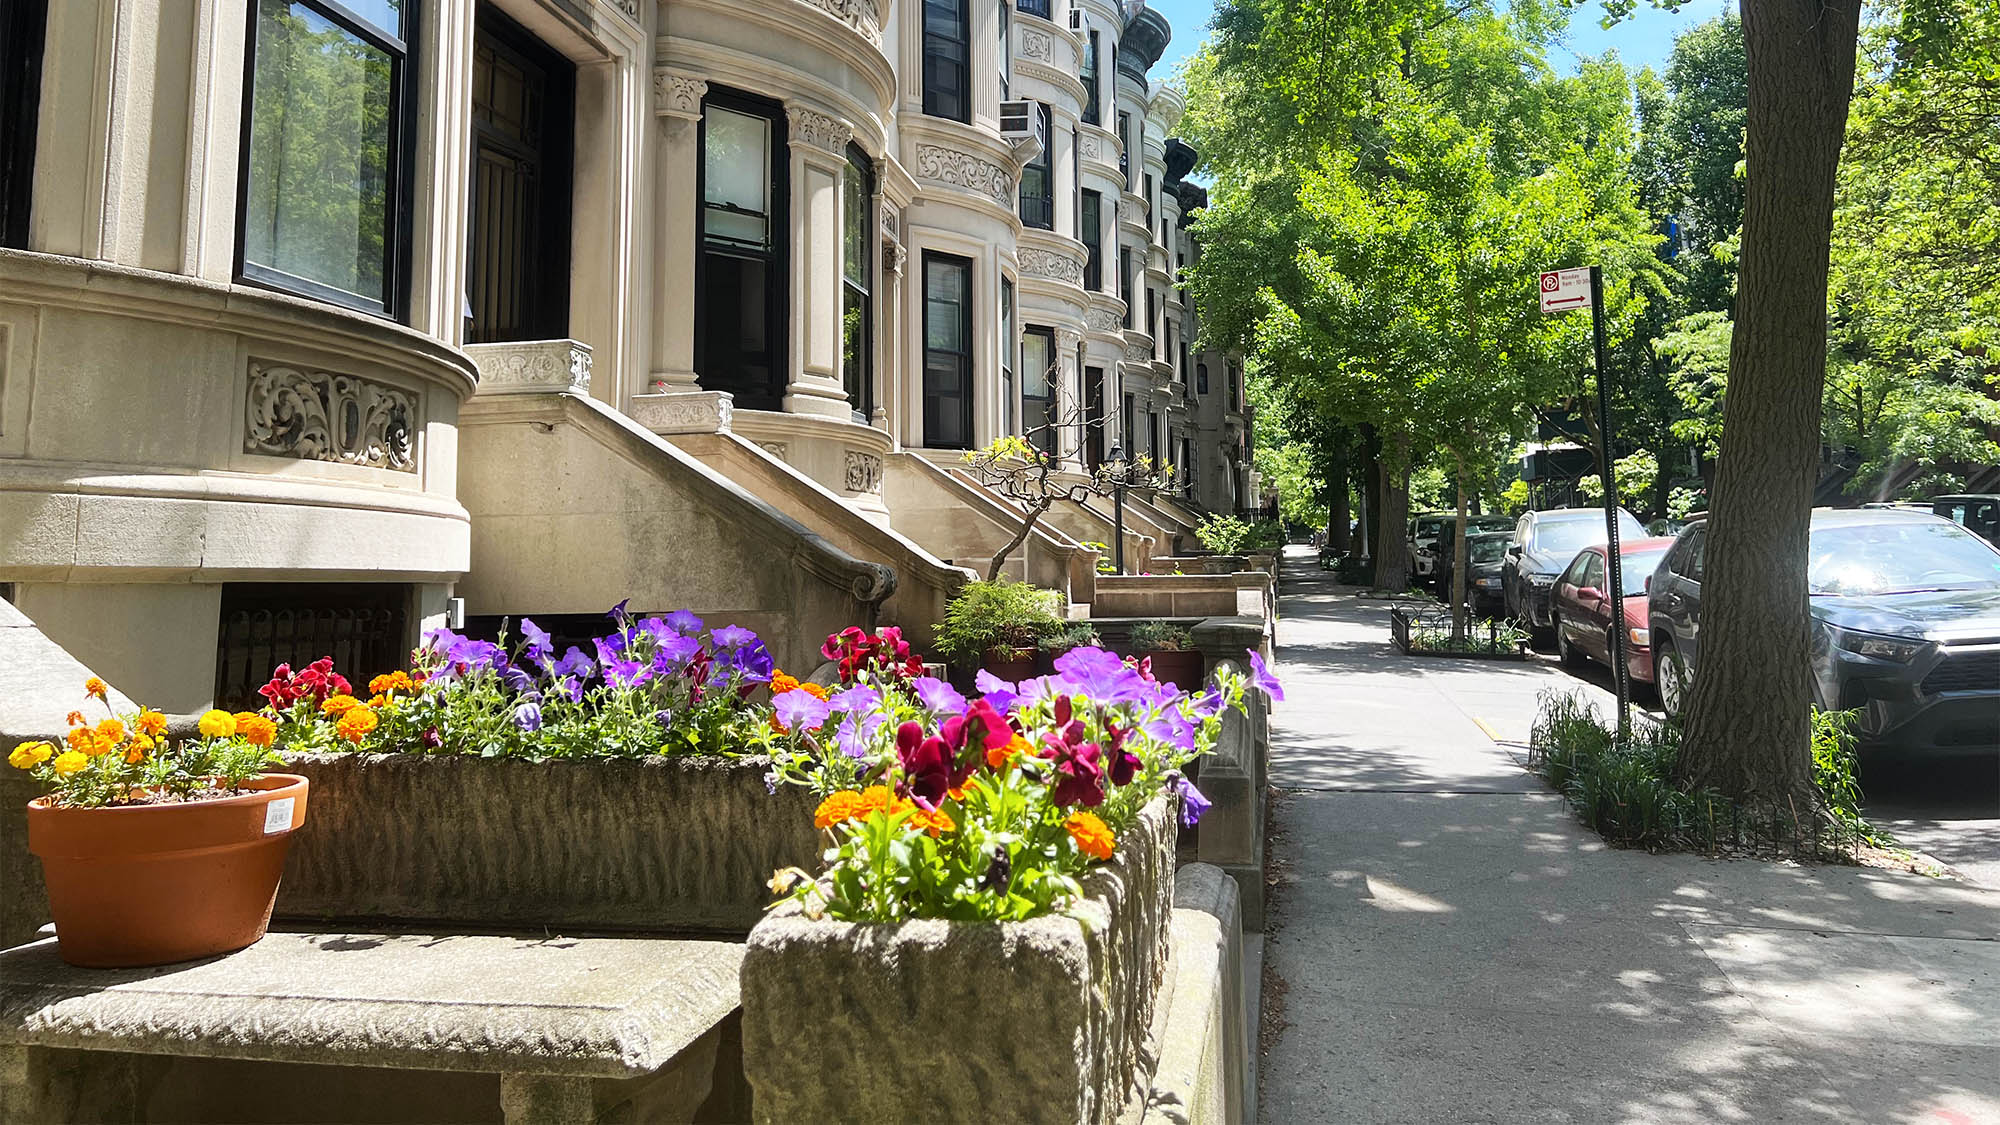 Rown of Brooklyn brownstone stoops with stoop garden in foreground